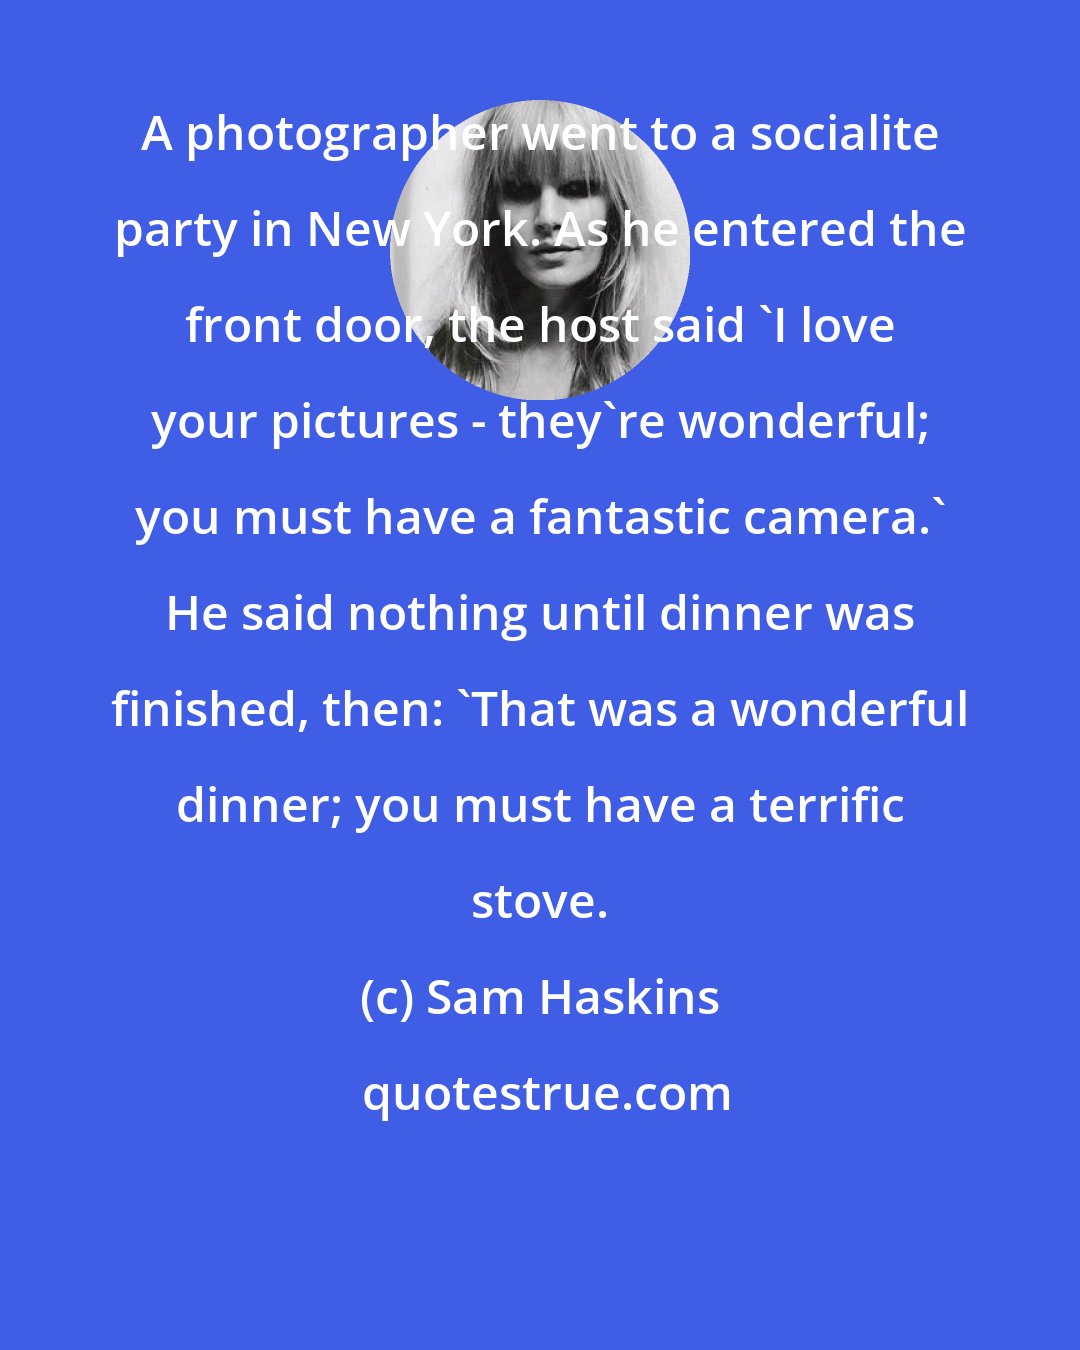 Sam Haskins: A photographer went to a socialite party in New York. As he entered the front door, the host said 'I love your pictures - they're wonderful; you must have a fantastic camera.' He said nothing until dinner was finished, then: 'That was a wonderful dinner; you must have a terrific stove.